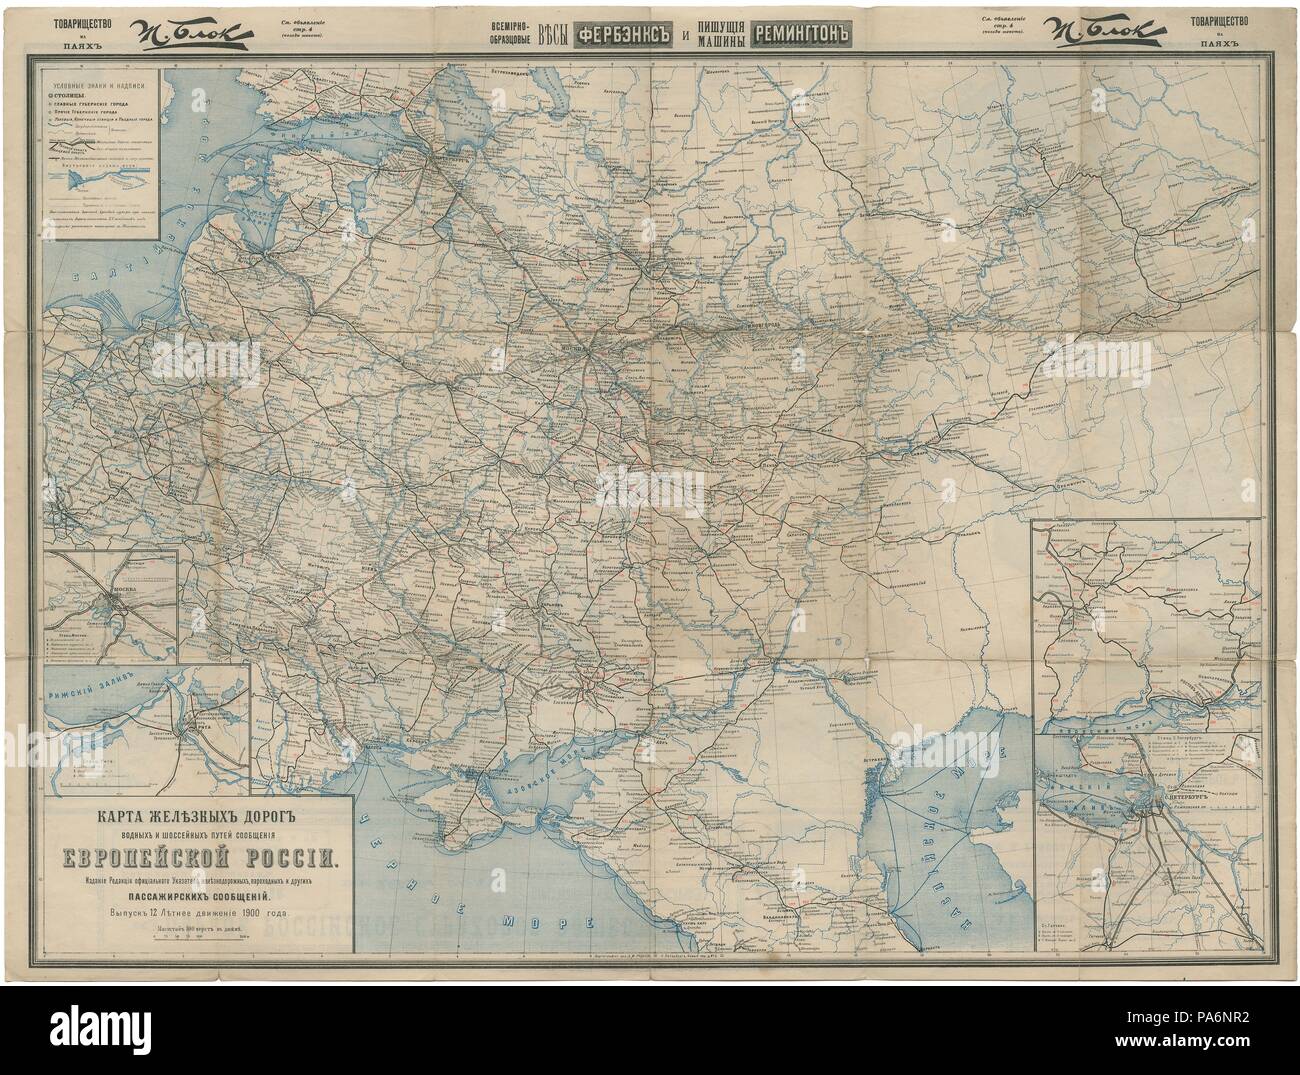 Map of Roads, Railroads and Inland Waterways of the Russian Empire, 1900. Museum: PRIVATE COLLECTION. Stock Photo